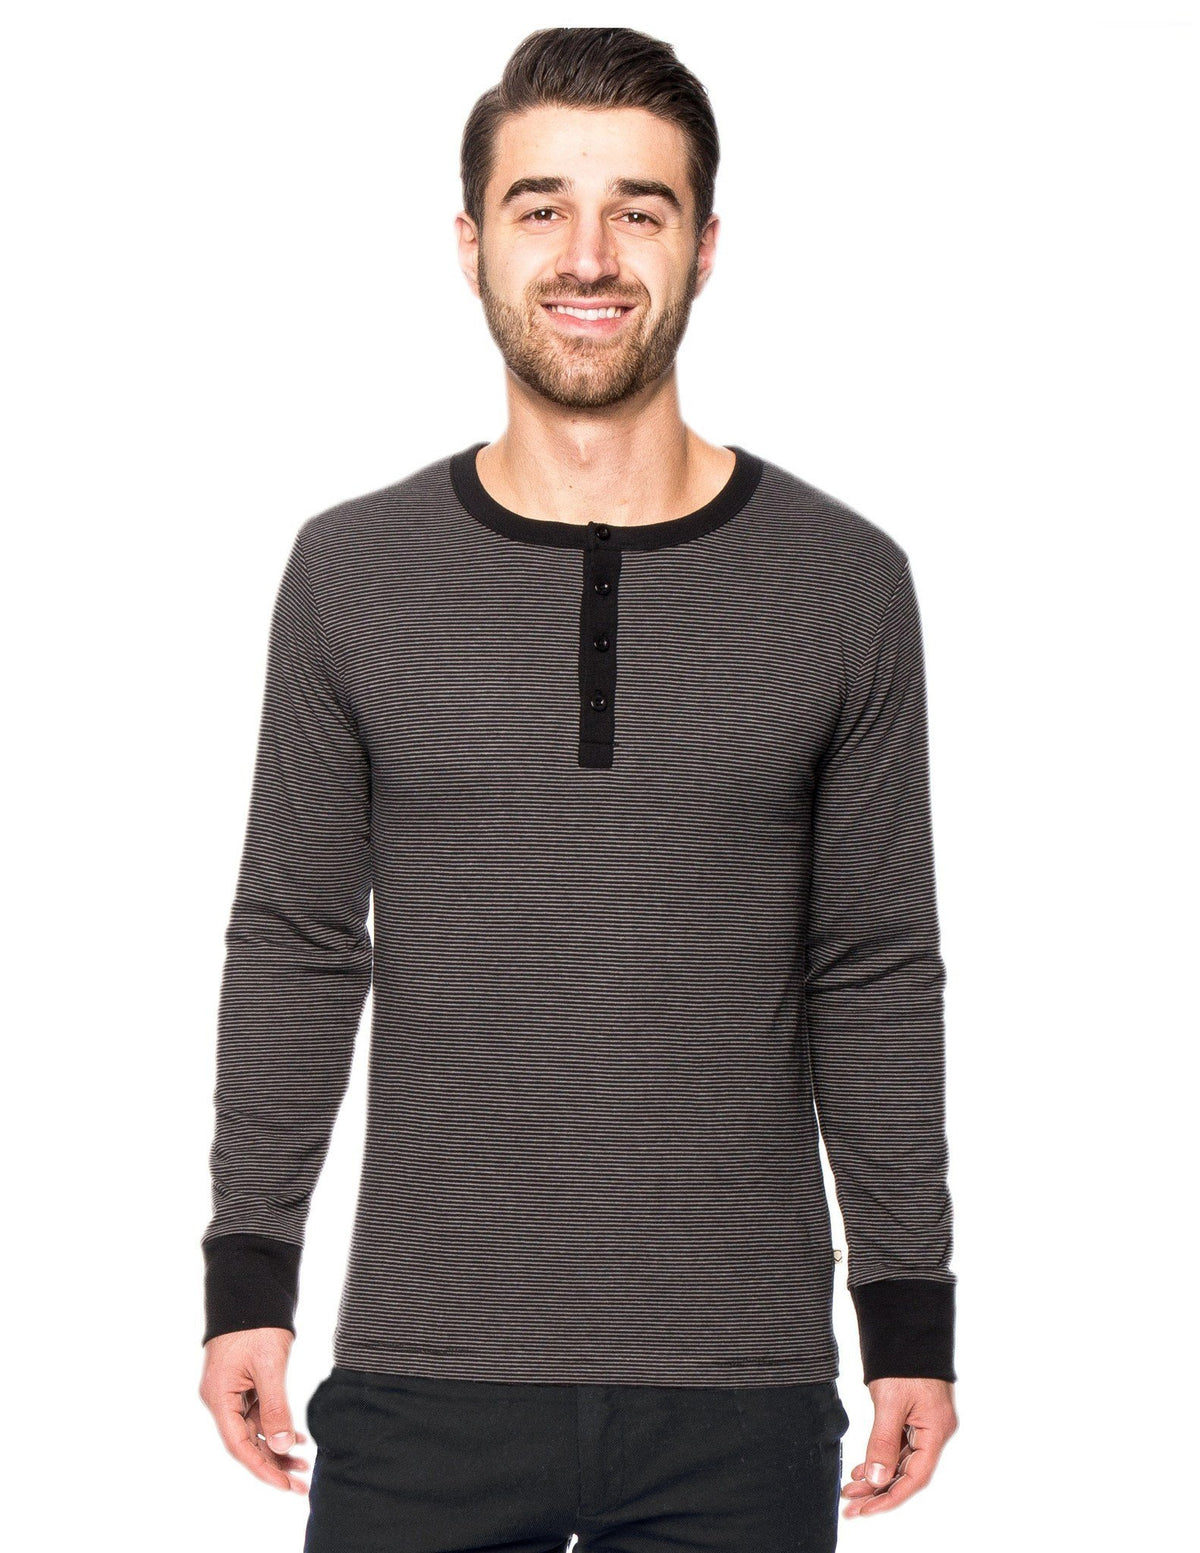 Men's Double Layer Thermal Long Sleeve Henley Top - Stripes Black/Charcoal